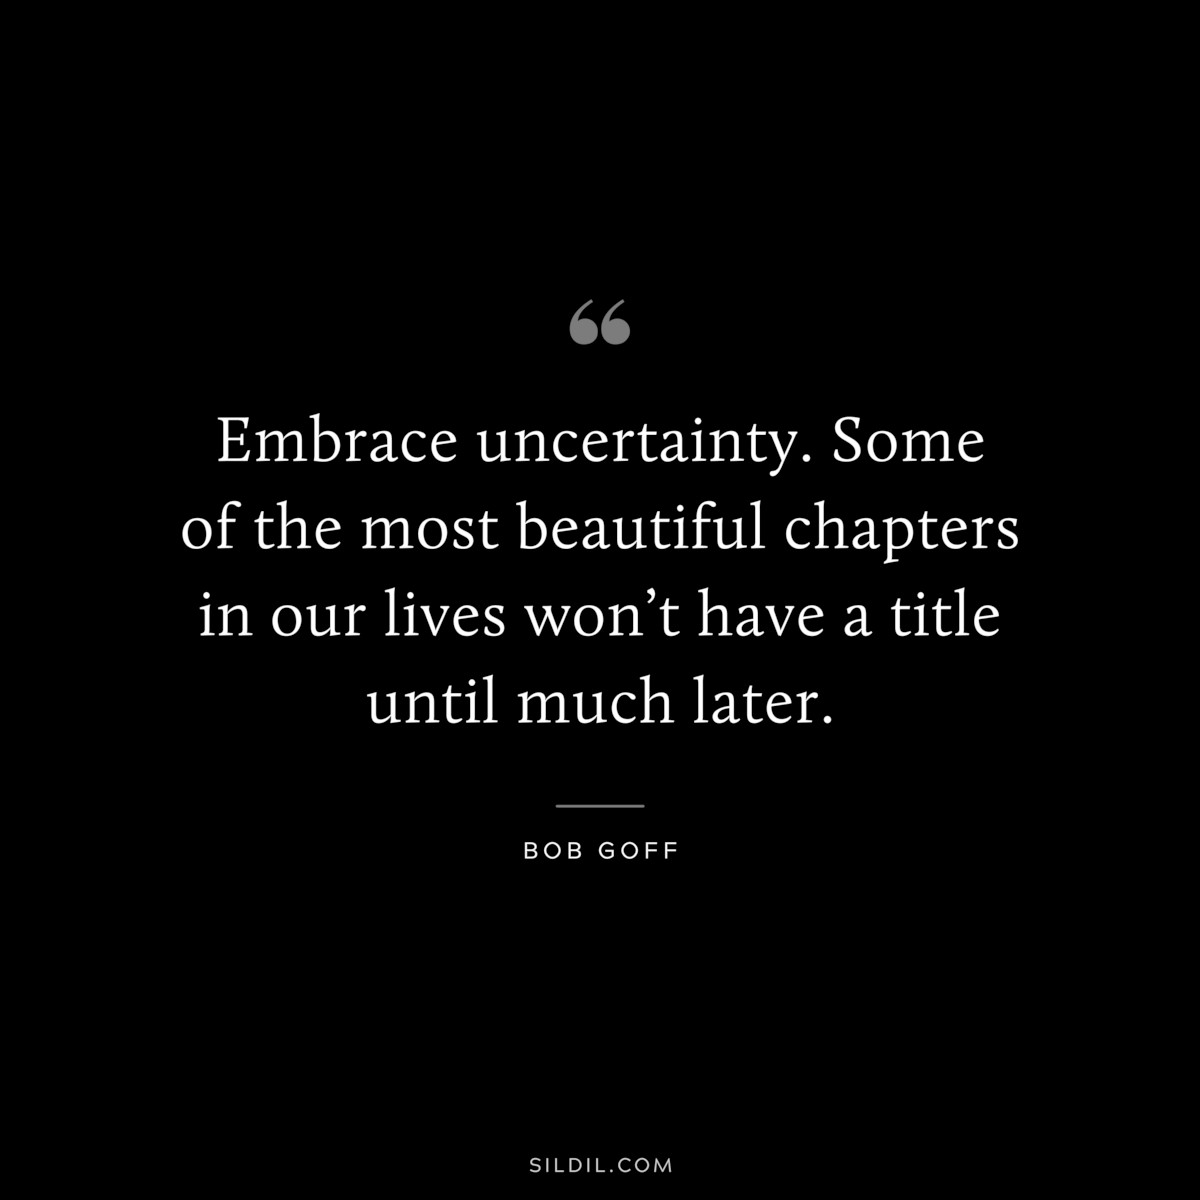 Embrace uncertainty. Some of the most beautiful chapters in our lives won’t have a title until much later. ― Bob Goff